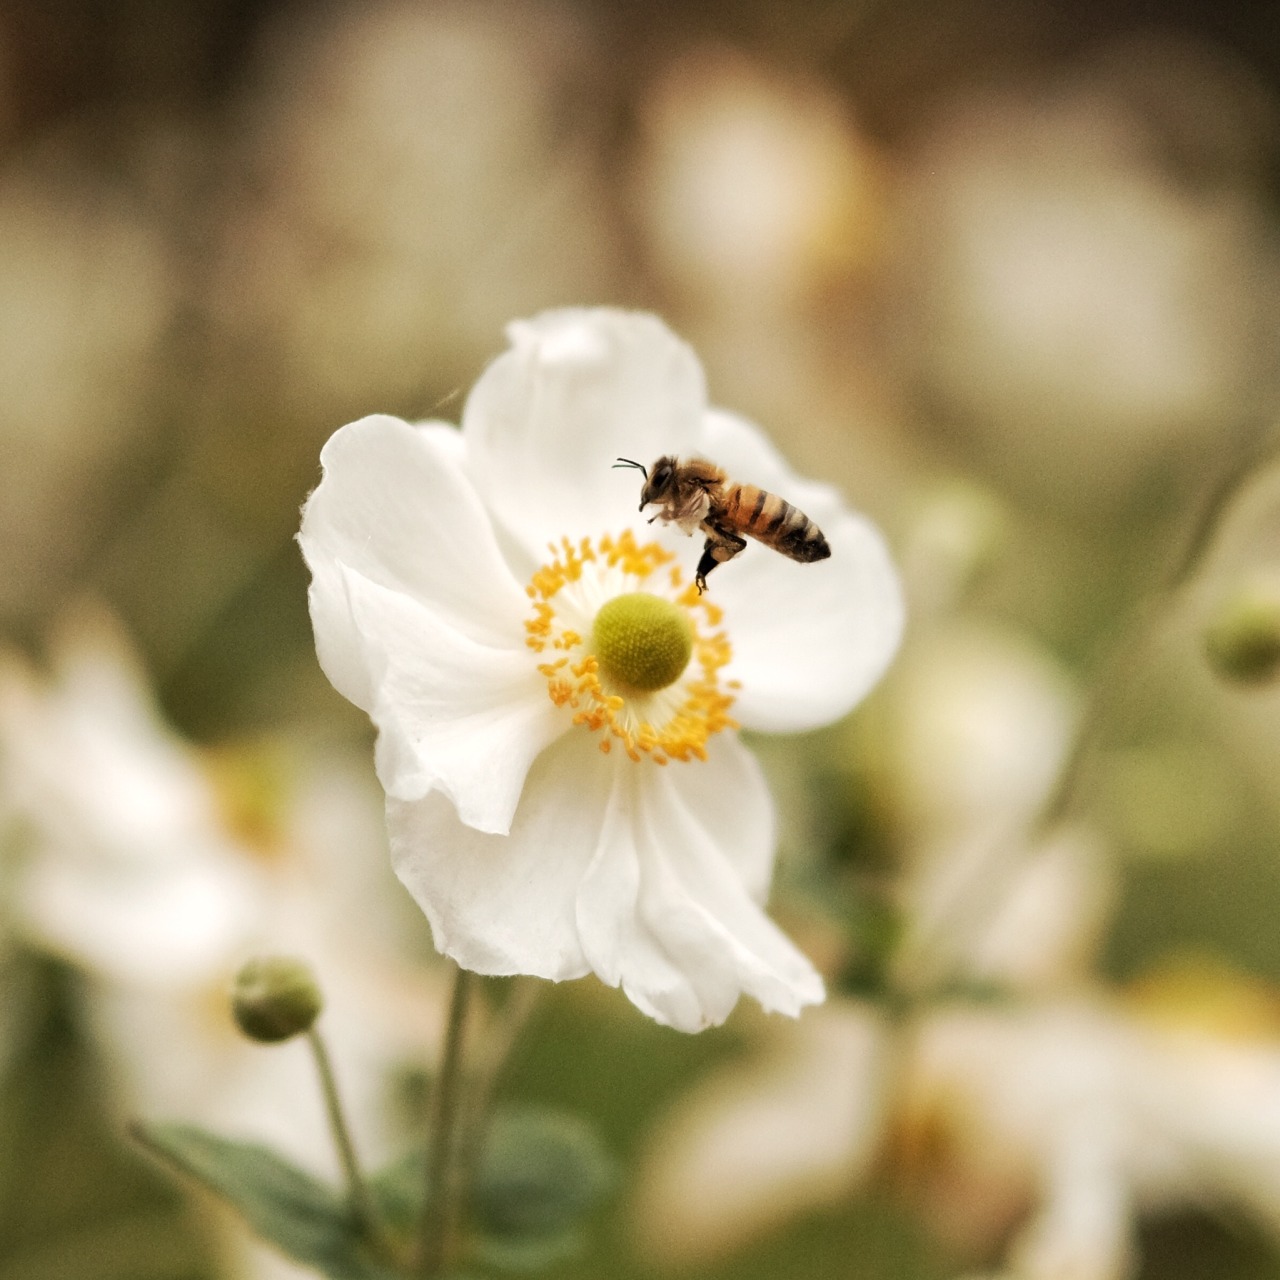 A close up image of a bee and a flower.